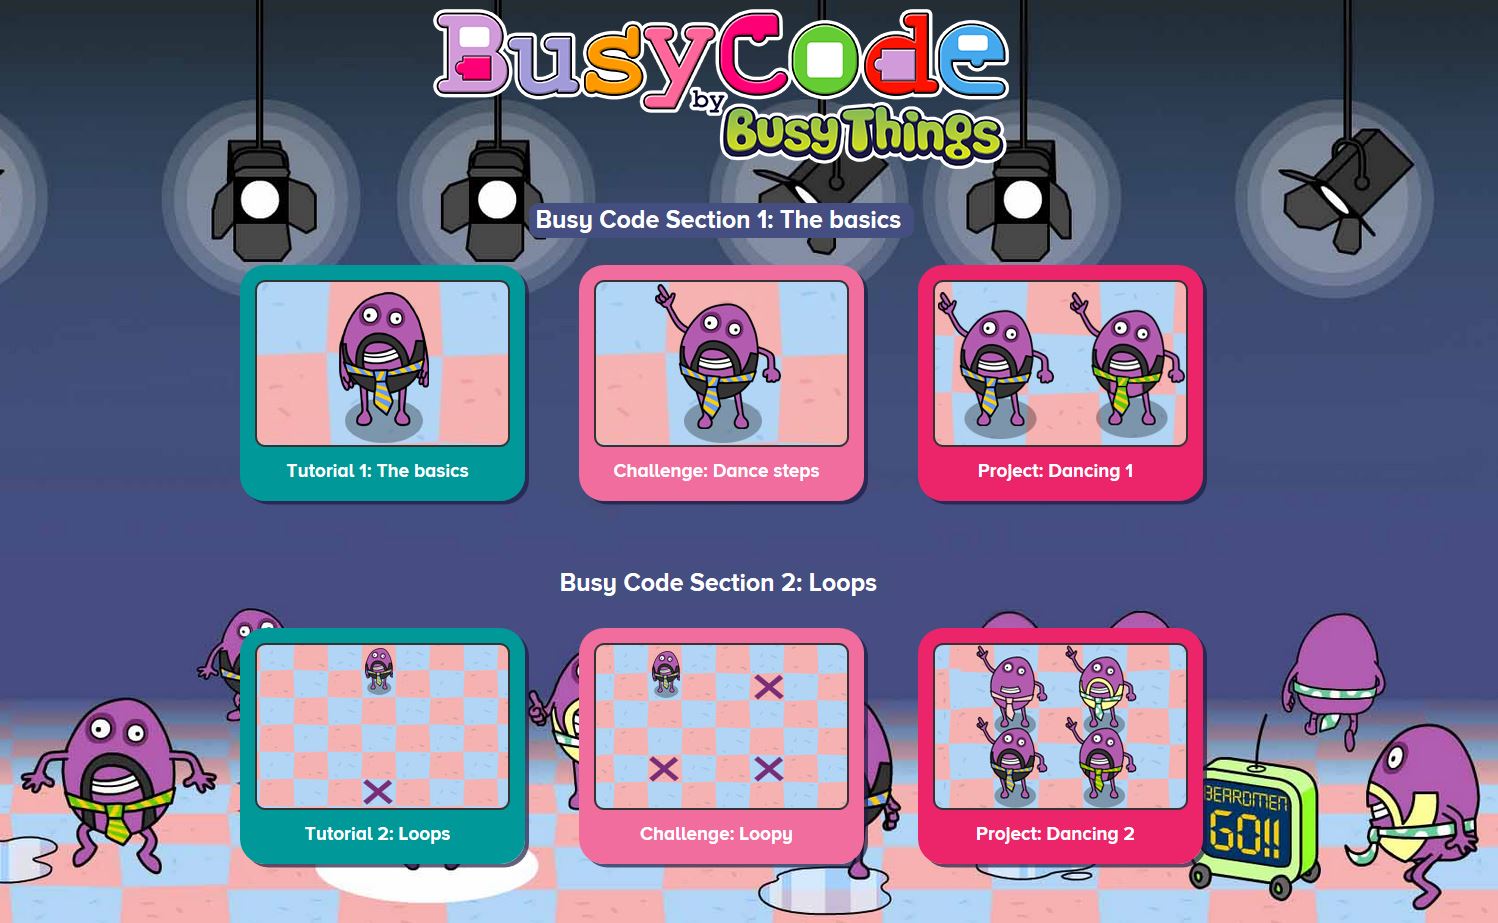 Screen shot of BusyCode by Busy Things home page, showing the first two sections with the basics and loops.